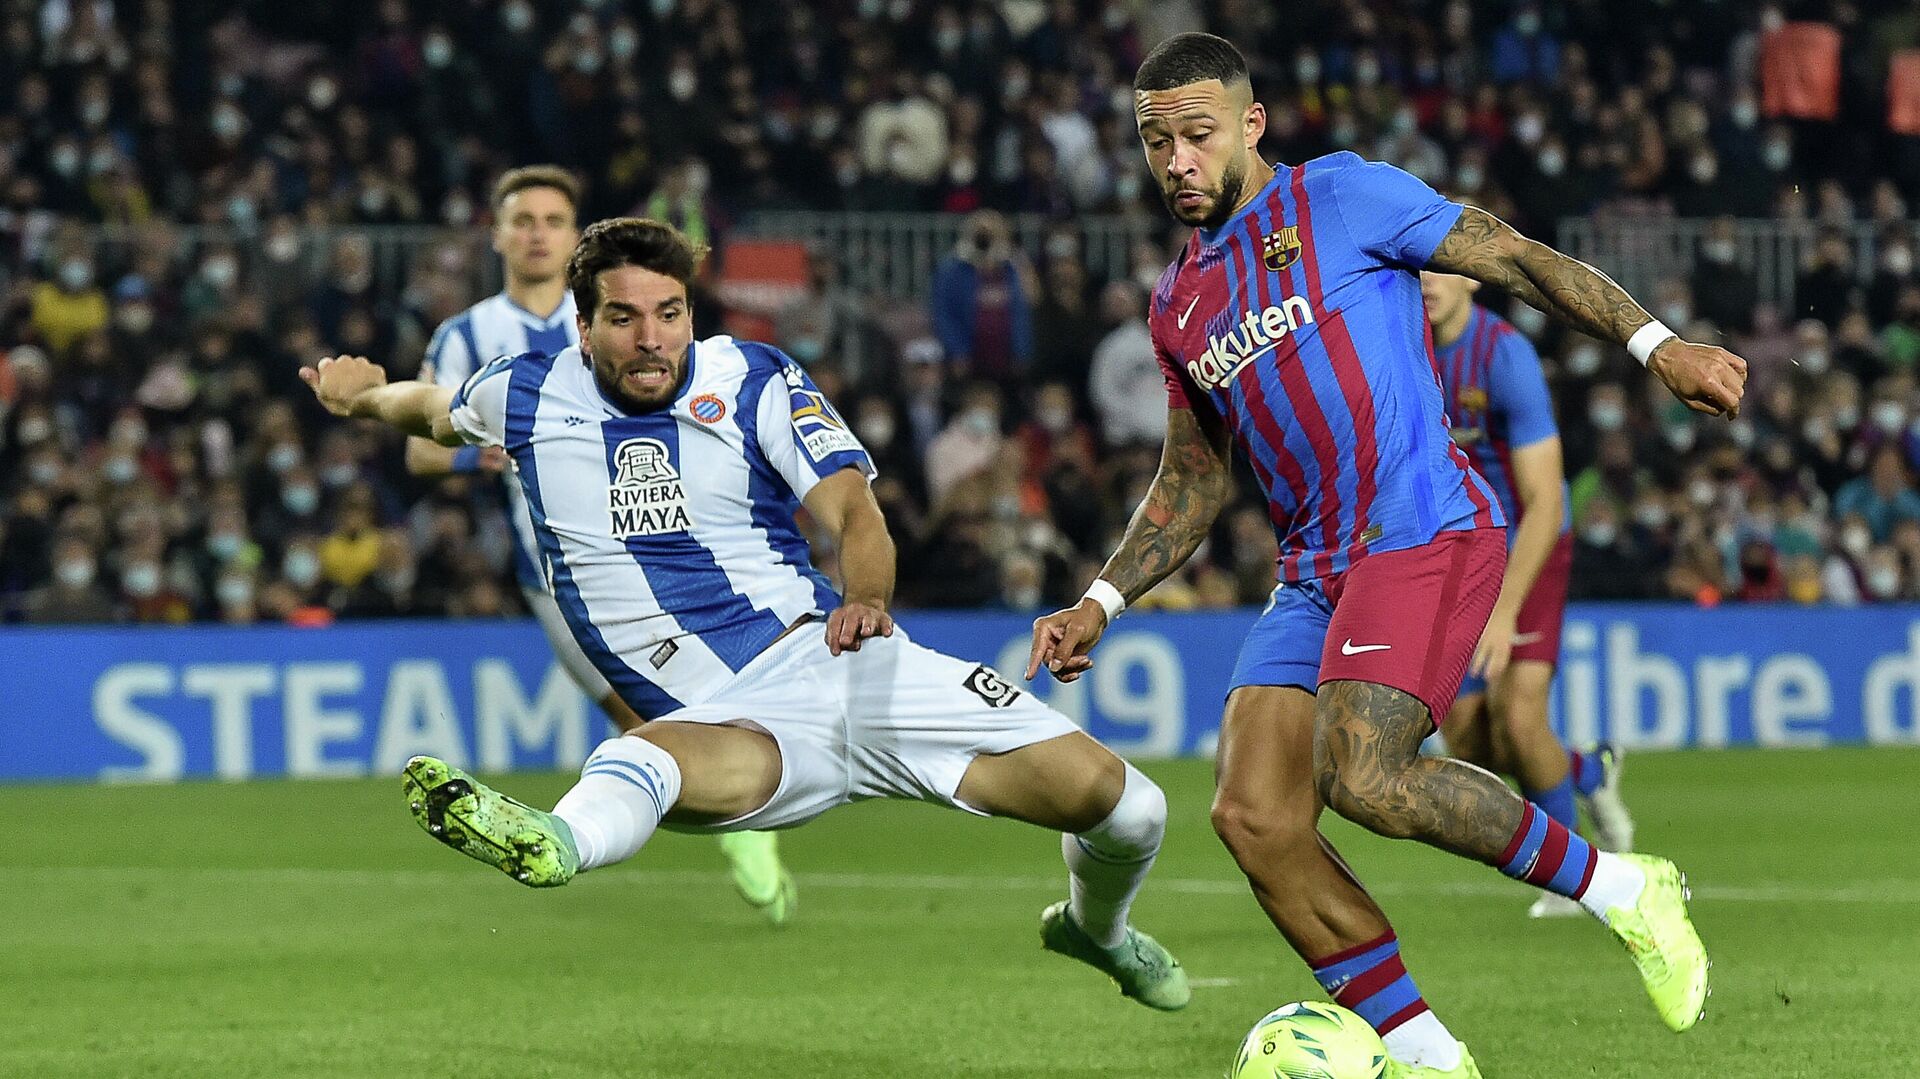 Barcelona's Dutch forward Memphis Depay (R) fights for the ball with Espanyol's Uruguayan defender Leandro Cabrera during the Spanish league football match between FC Barcelona and RCD Espanyol, at the Camp Nou stadium in Barcelona on November 20, 2021. (Photo by Pau BARRENA / AFP) - РИА Новости, 1920, 21.11.2021